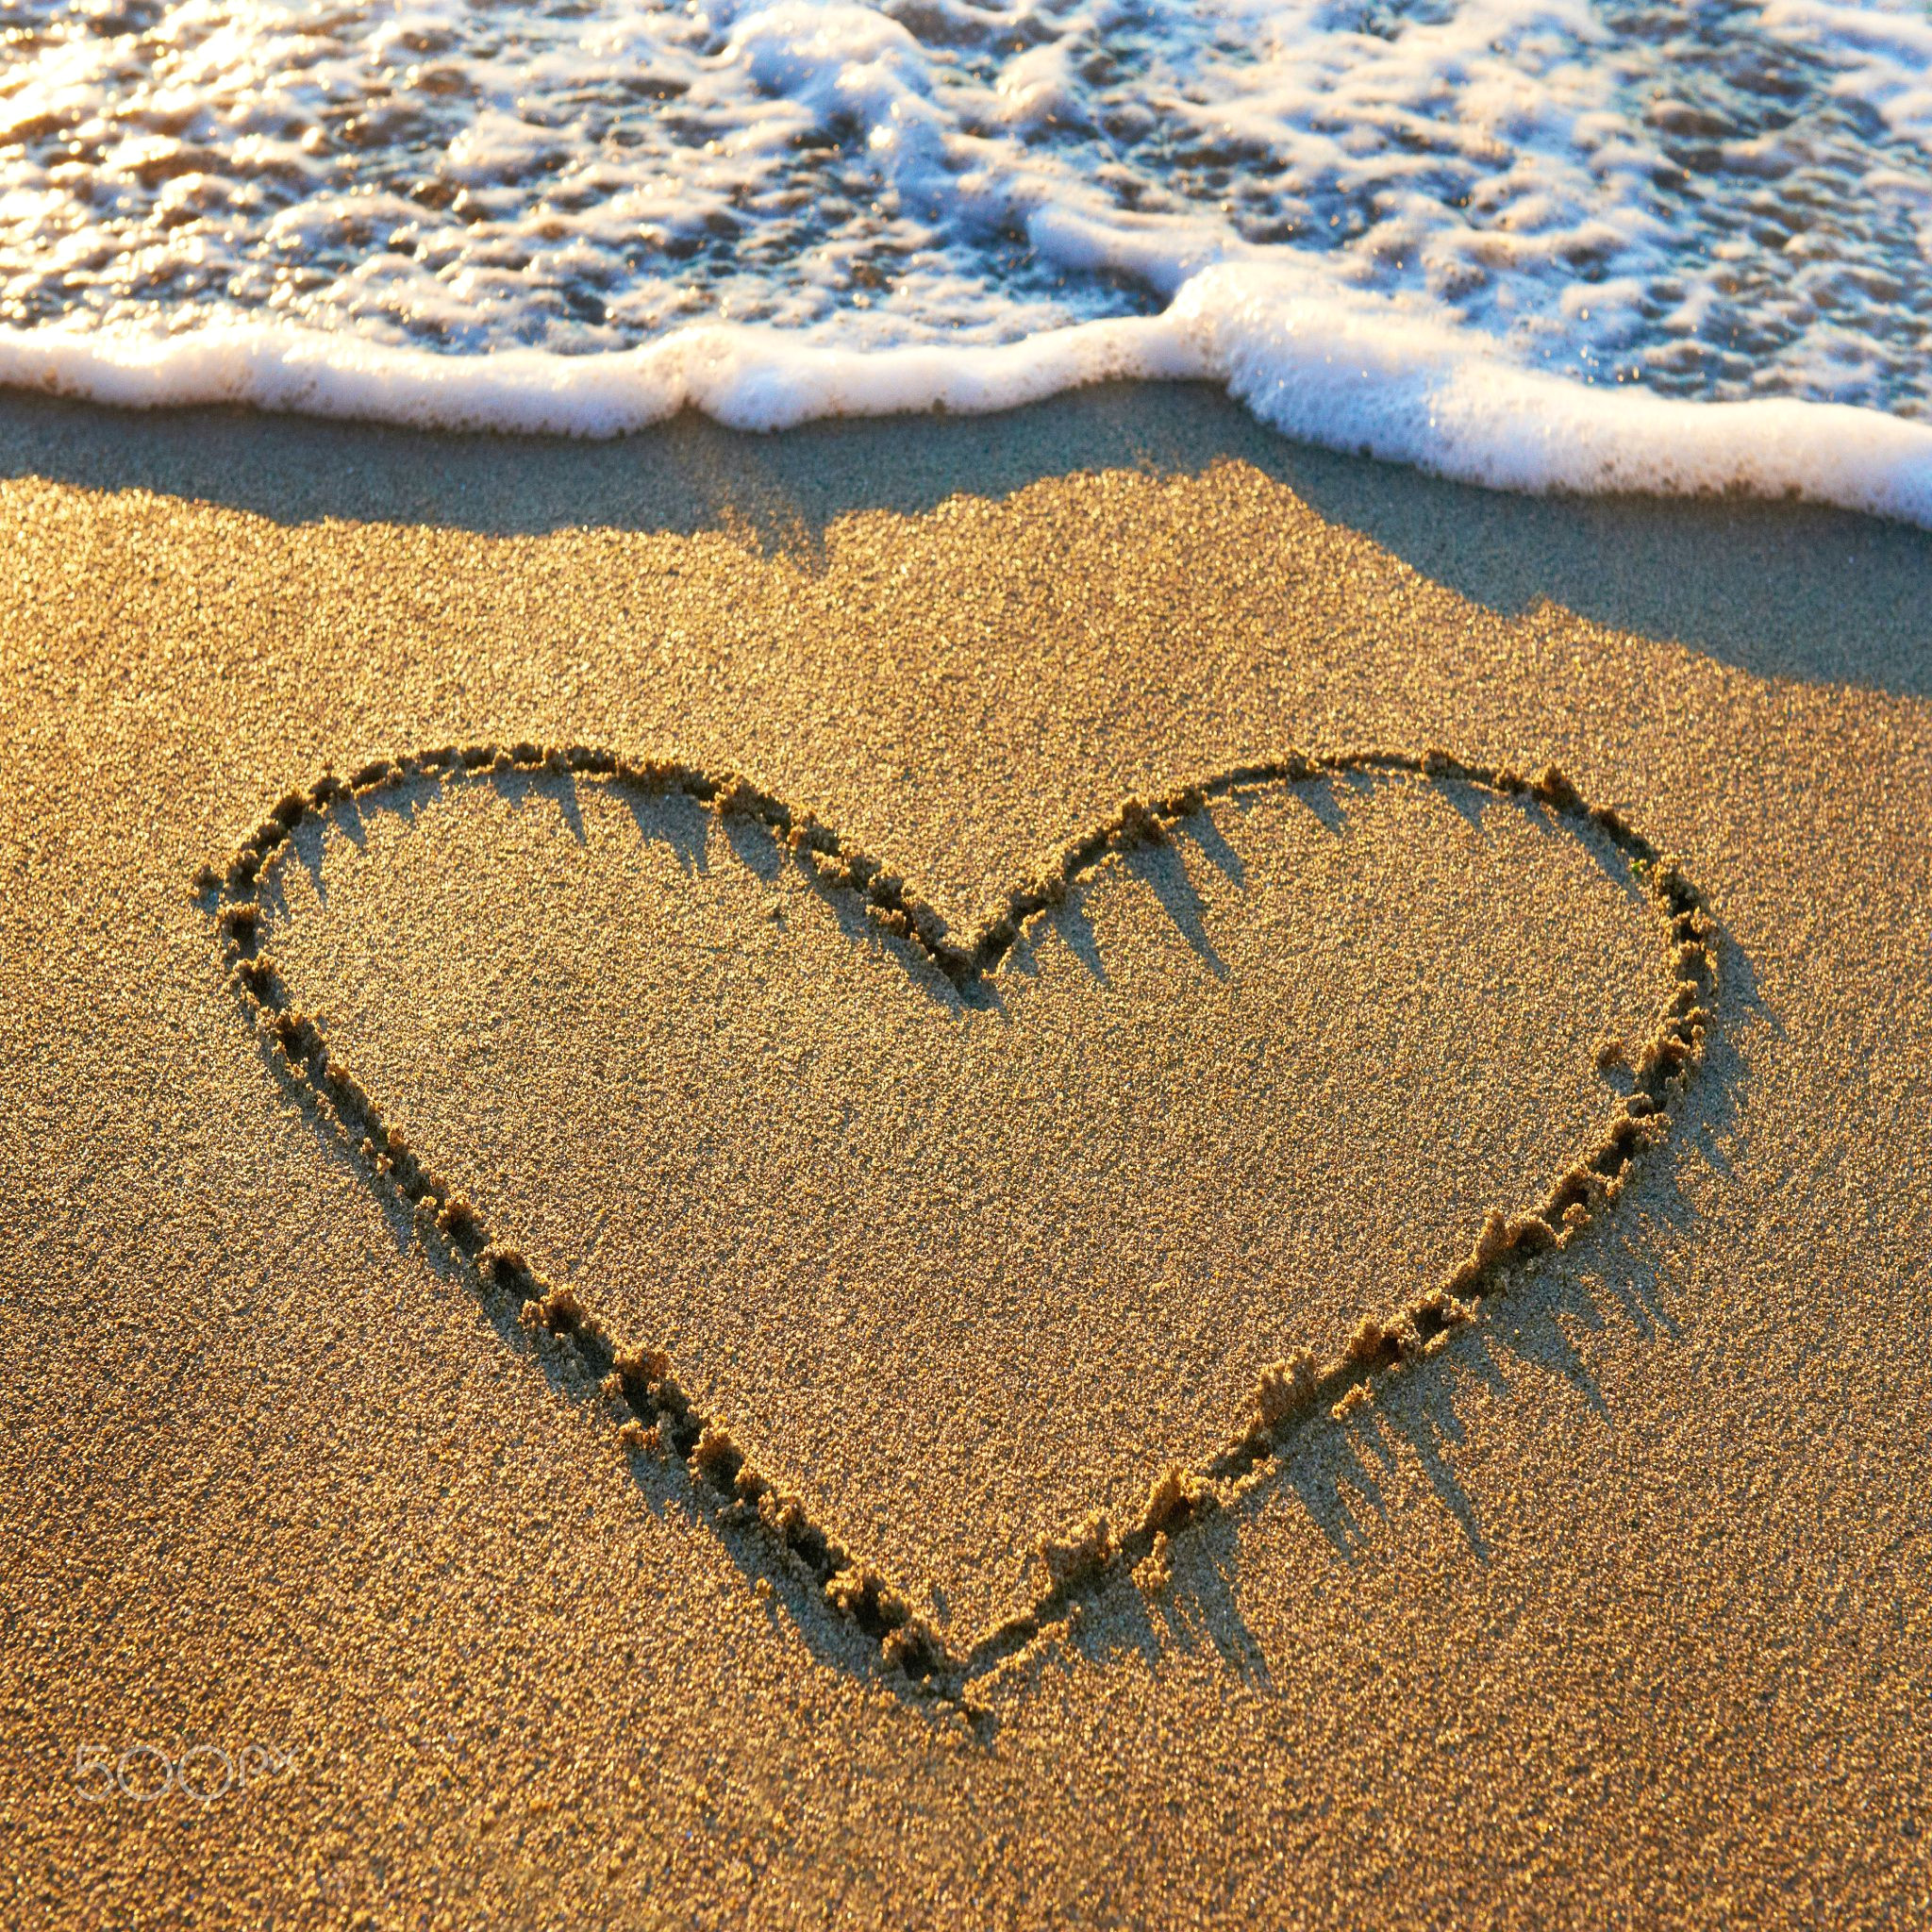 heart drawn on the beach sand with sea foam and wave